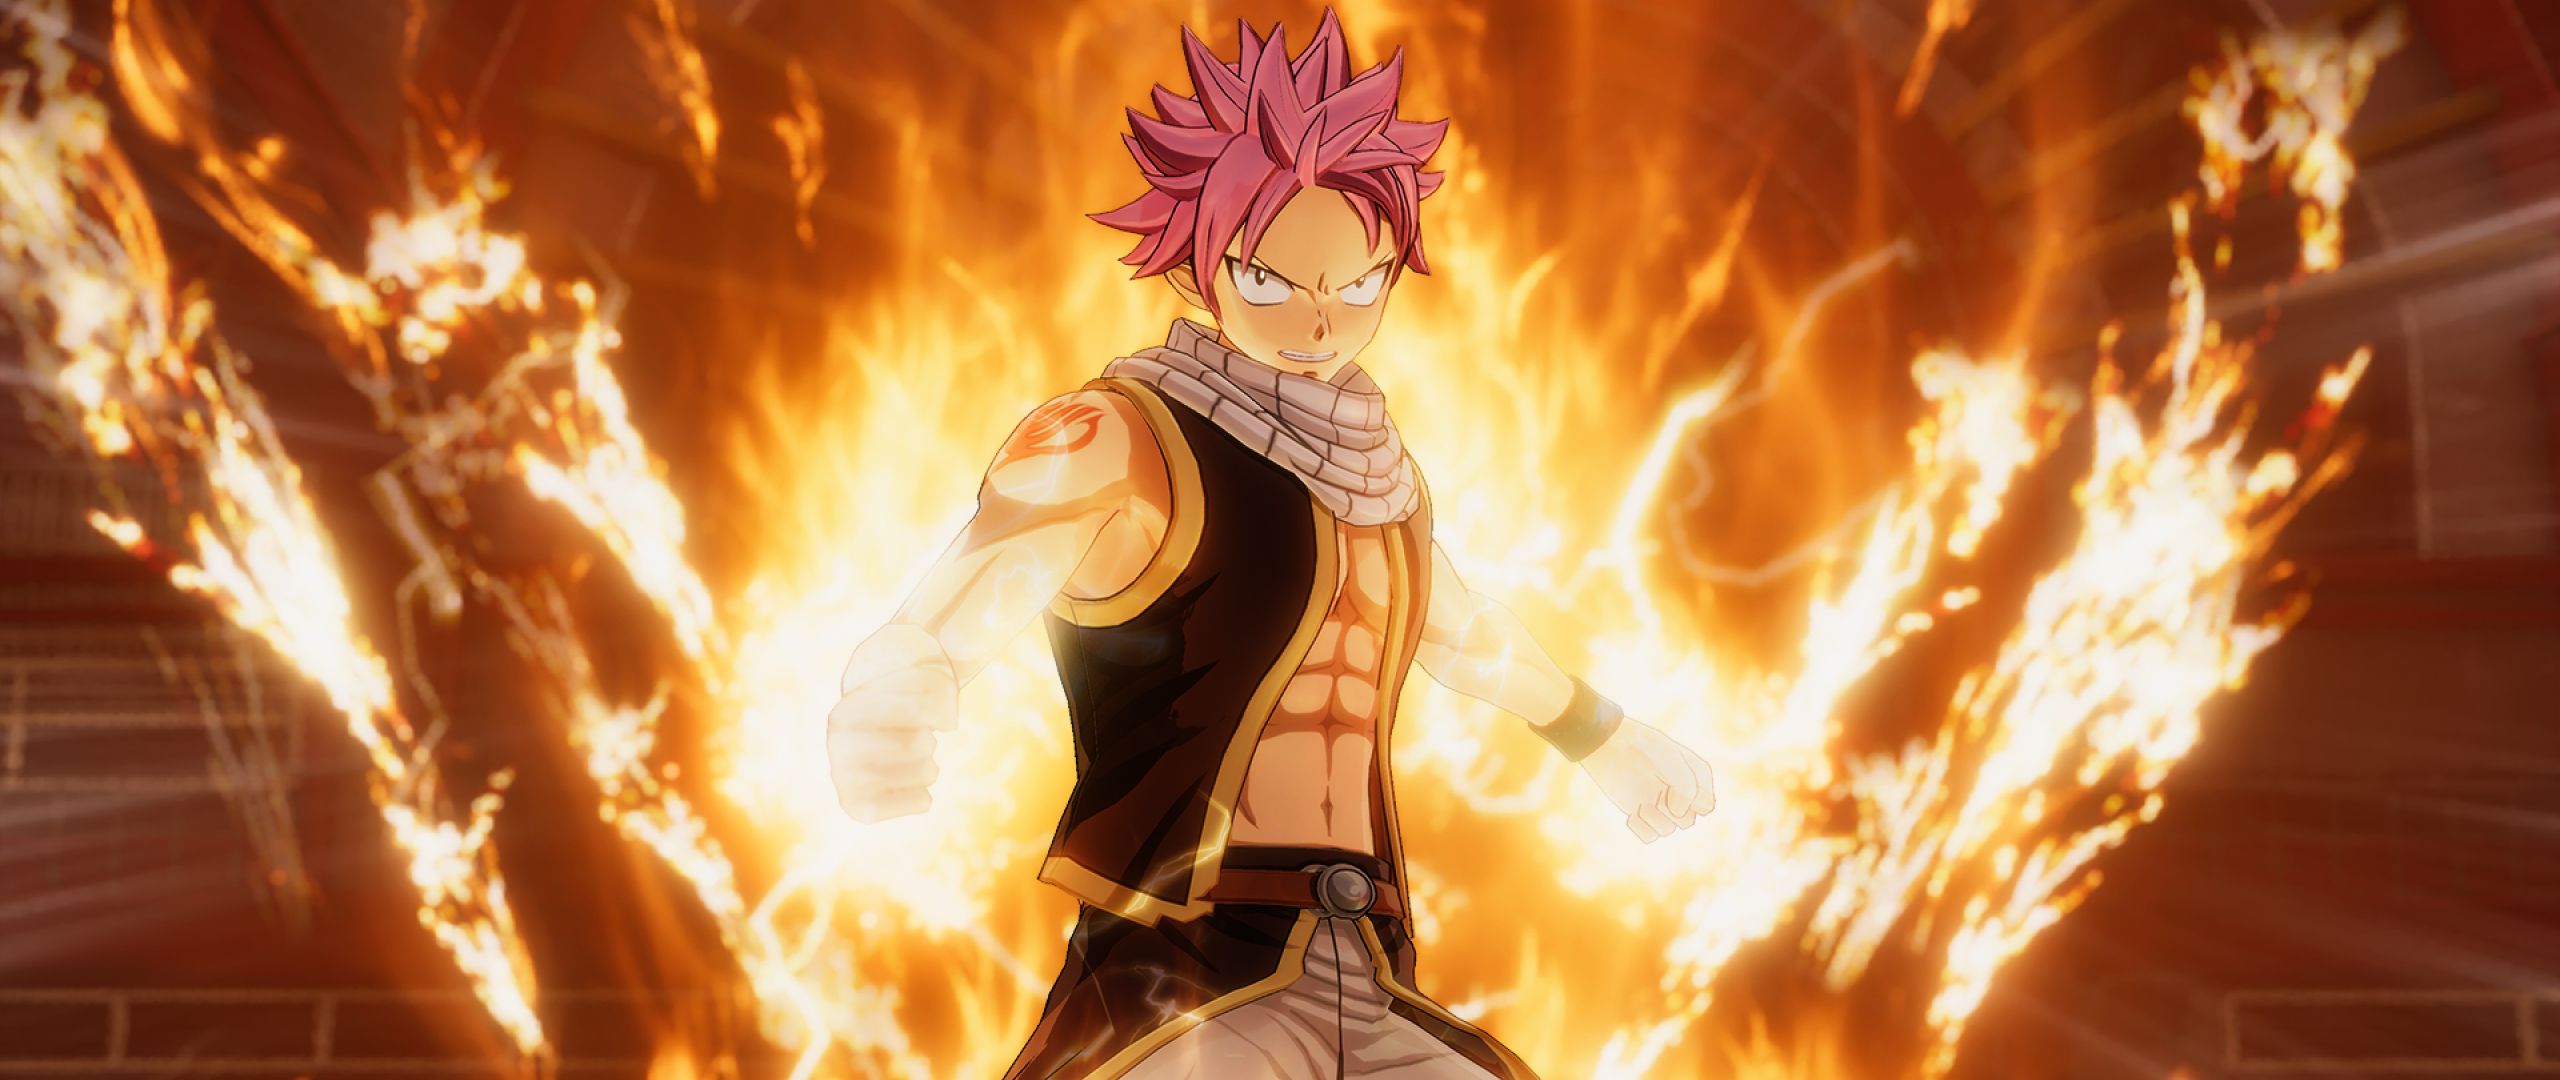 Fairy Tail 2019 Game 2560x1080 Resolution Wallpaper, HD